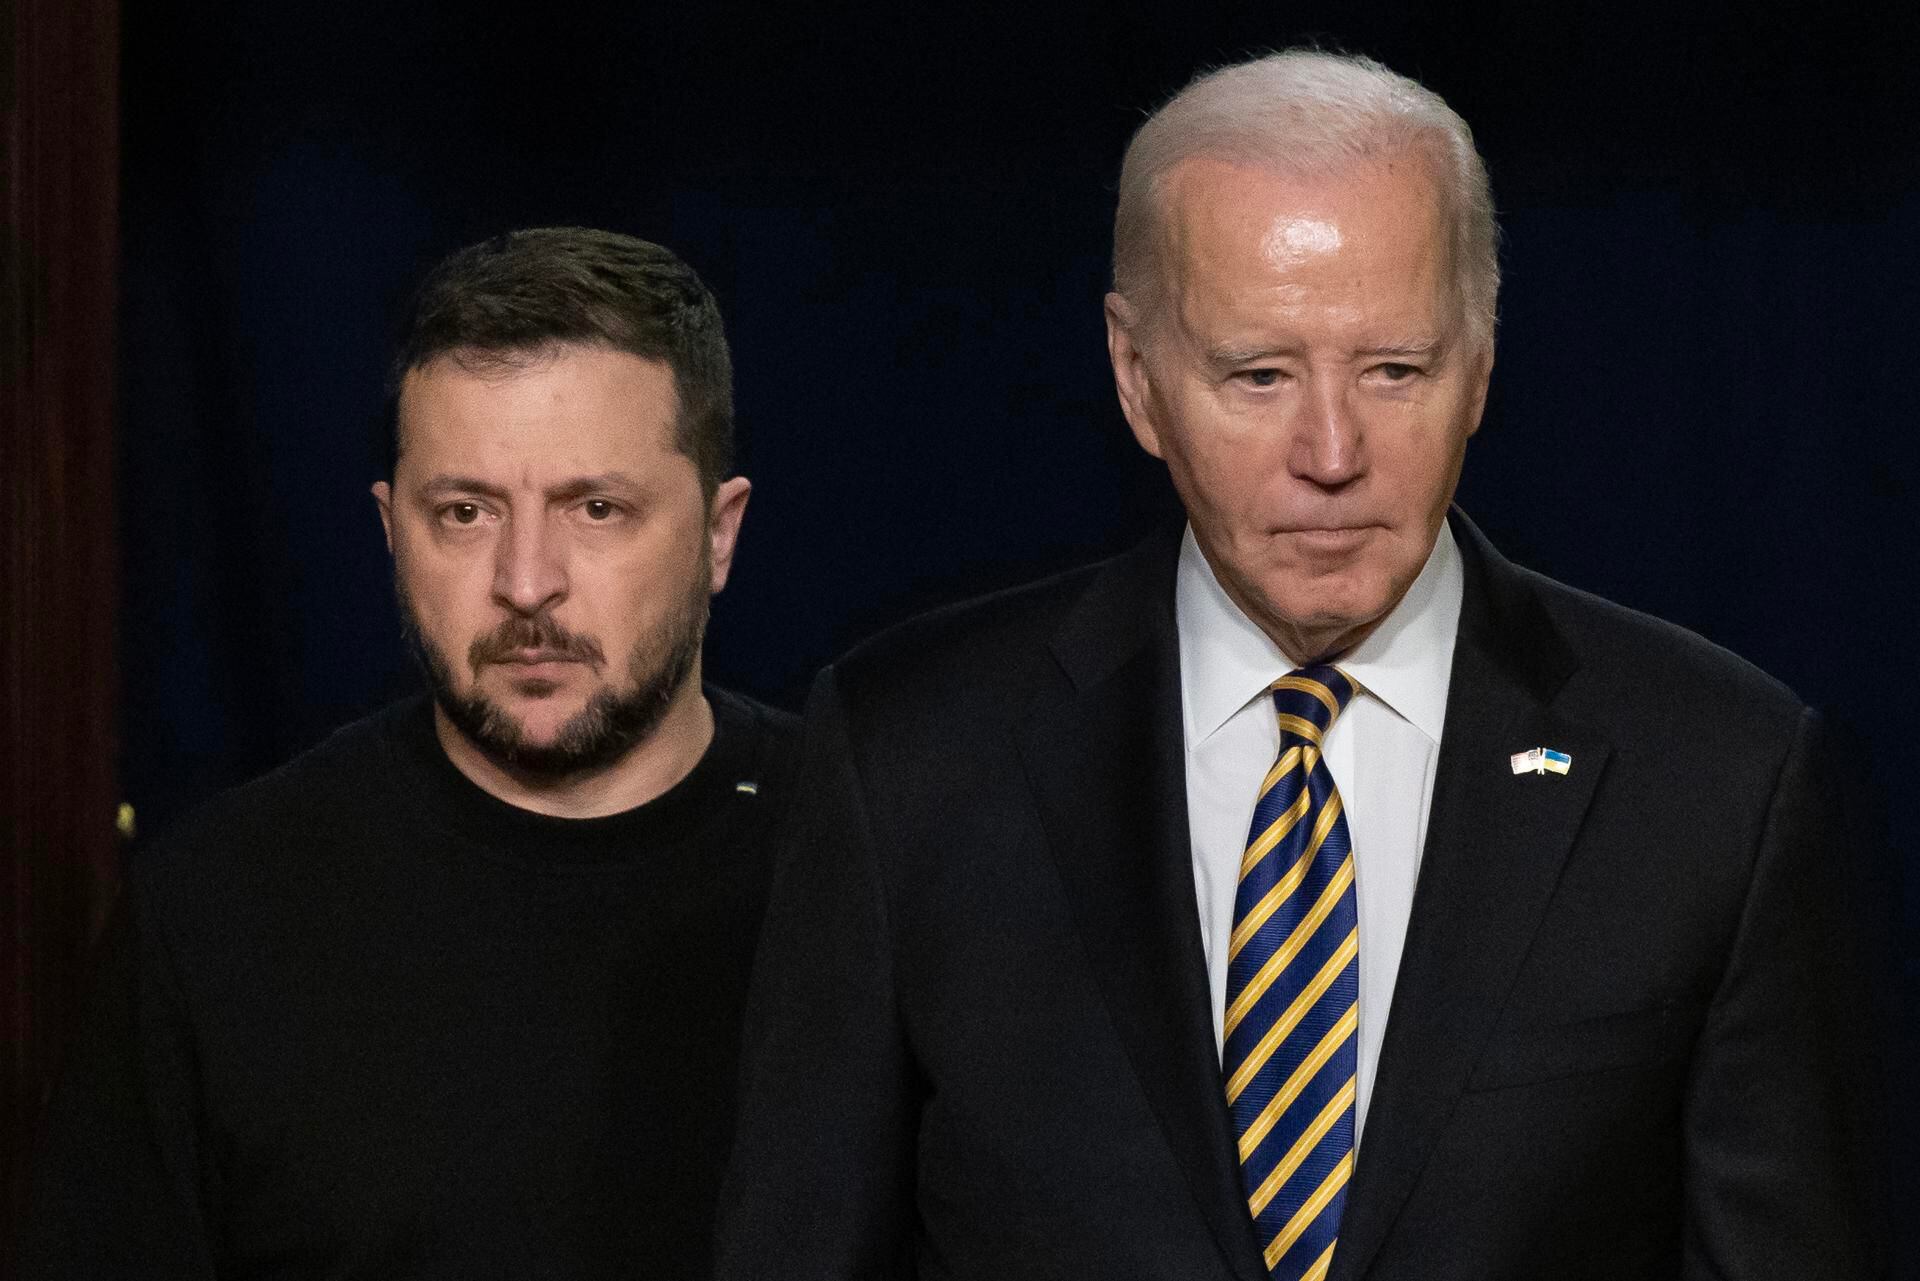 US President Joe Biden (right) and Ukrainian President Volodymyr Zelensky enter the room to hold a press conference at the White House on December 12, 2023. (EFE/EPA/MICHAEL REYNOLDS).